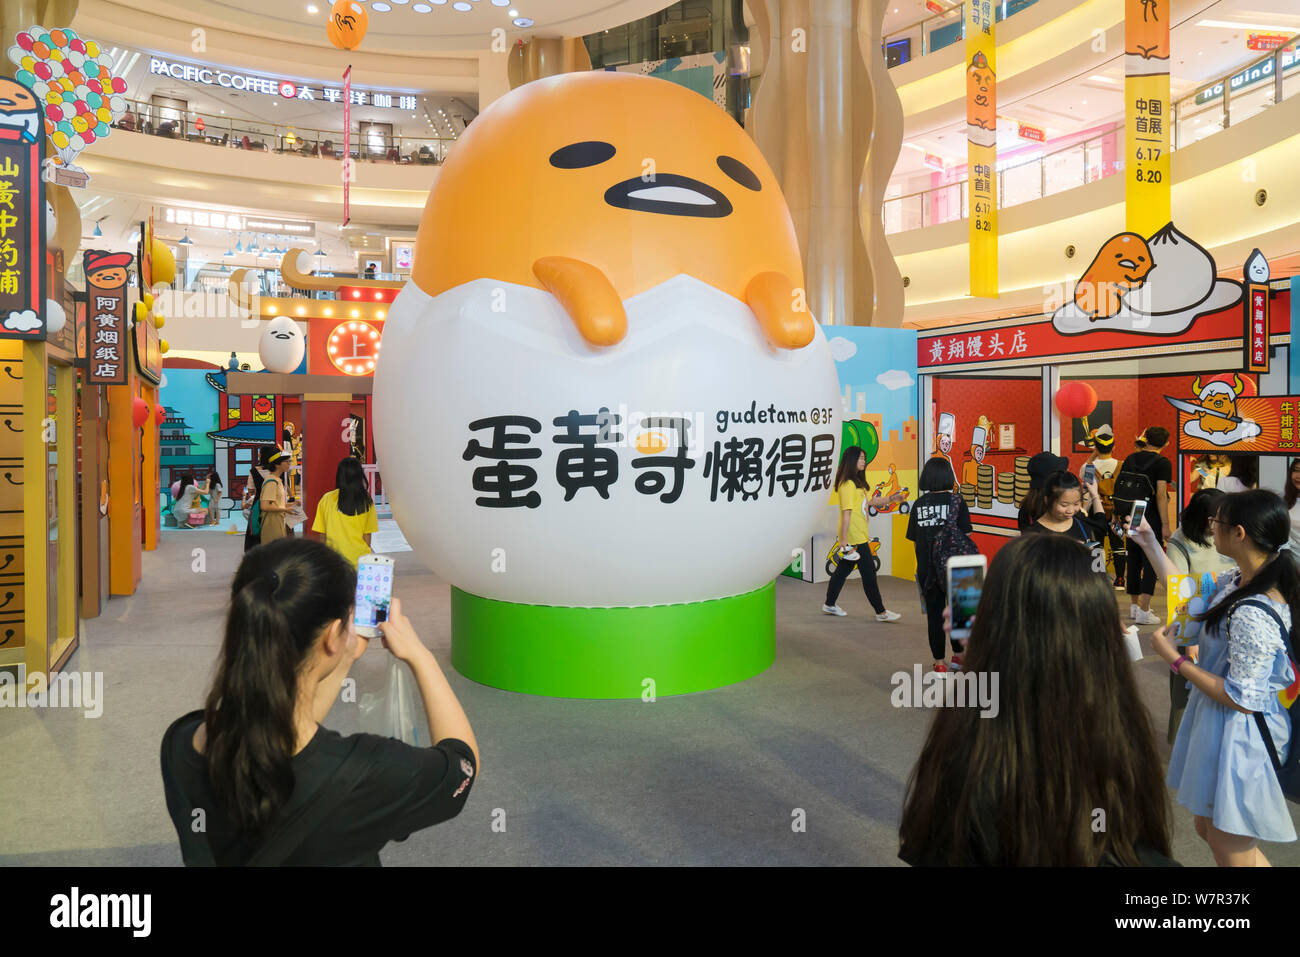 Cartoon enthusiasts take photos of Gudetama, or lazy egg, created by Hello Kitty's developer Sanrio, in Shanghai, China, 19 June 2017.   The Japanese Stock Photo